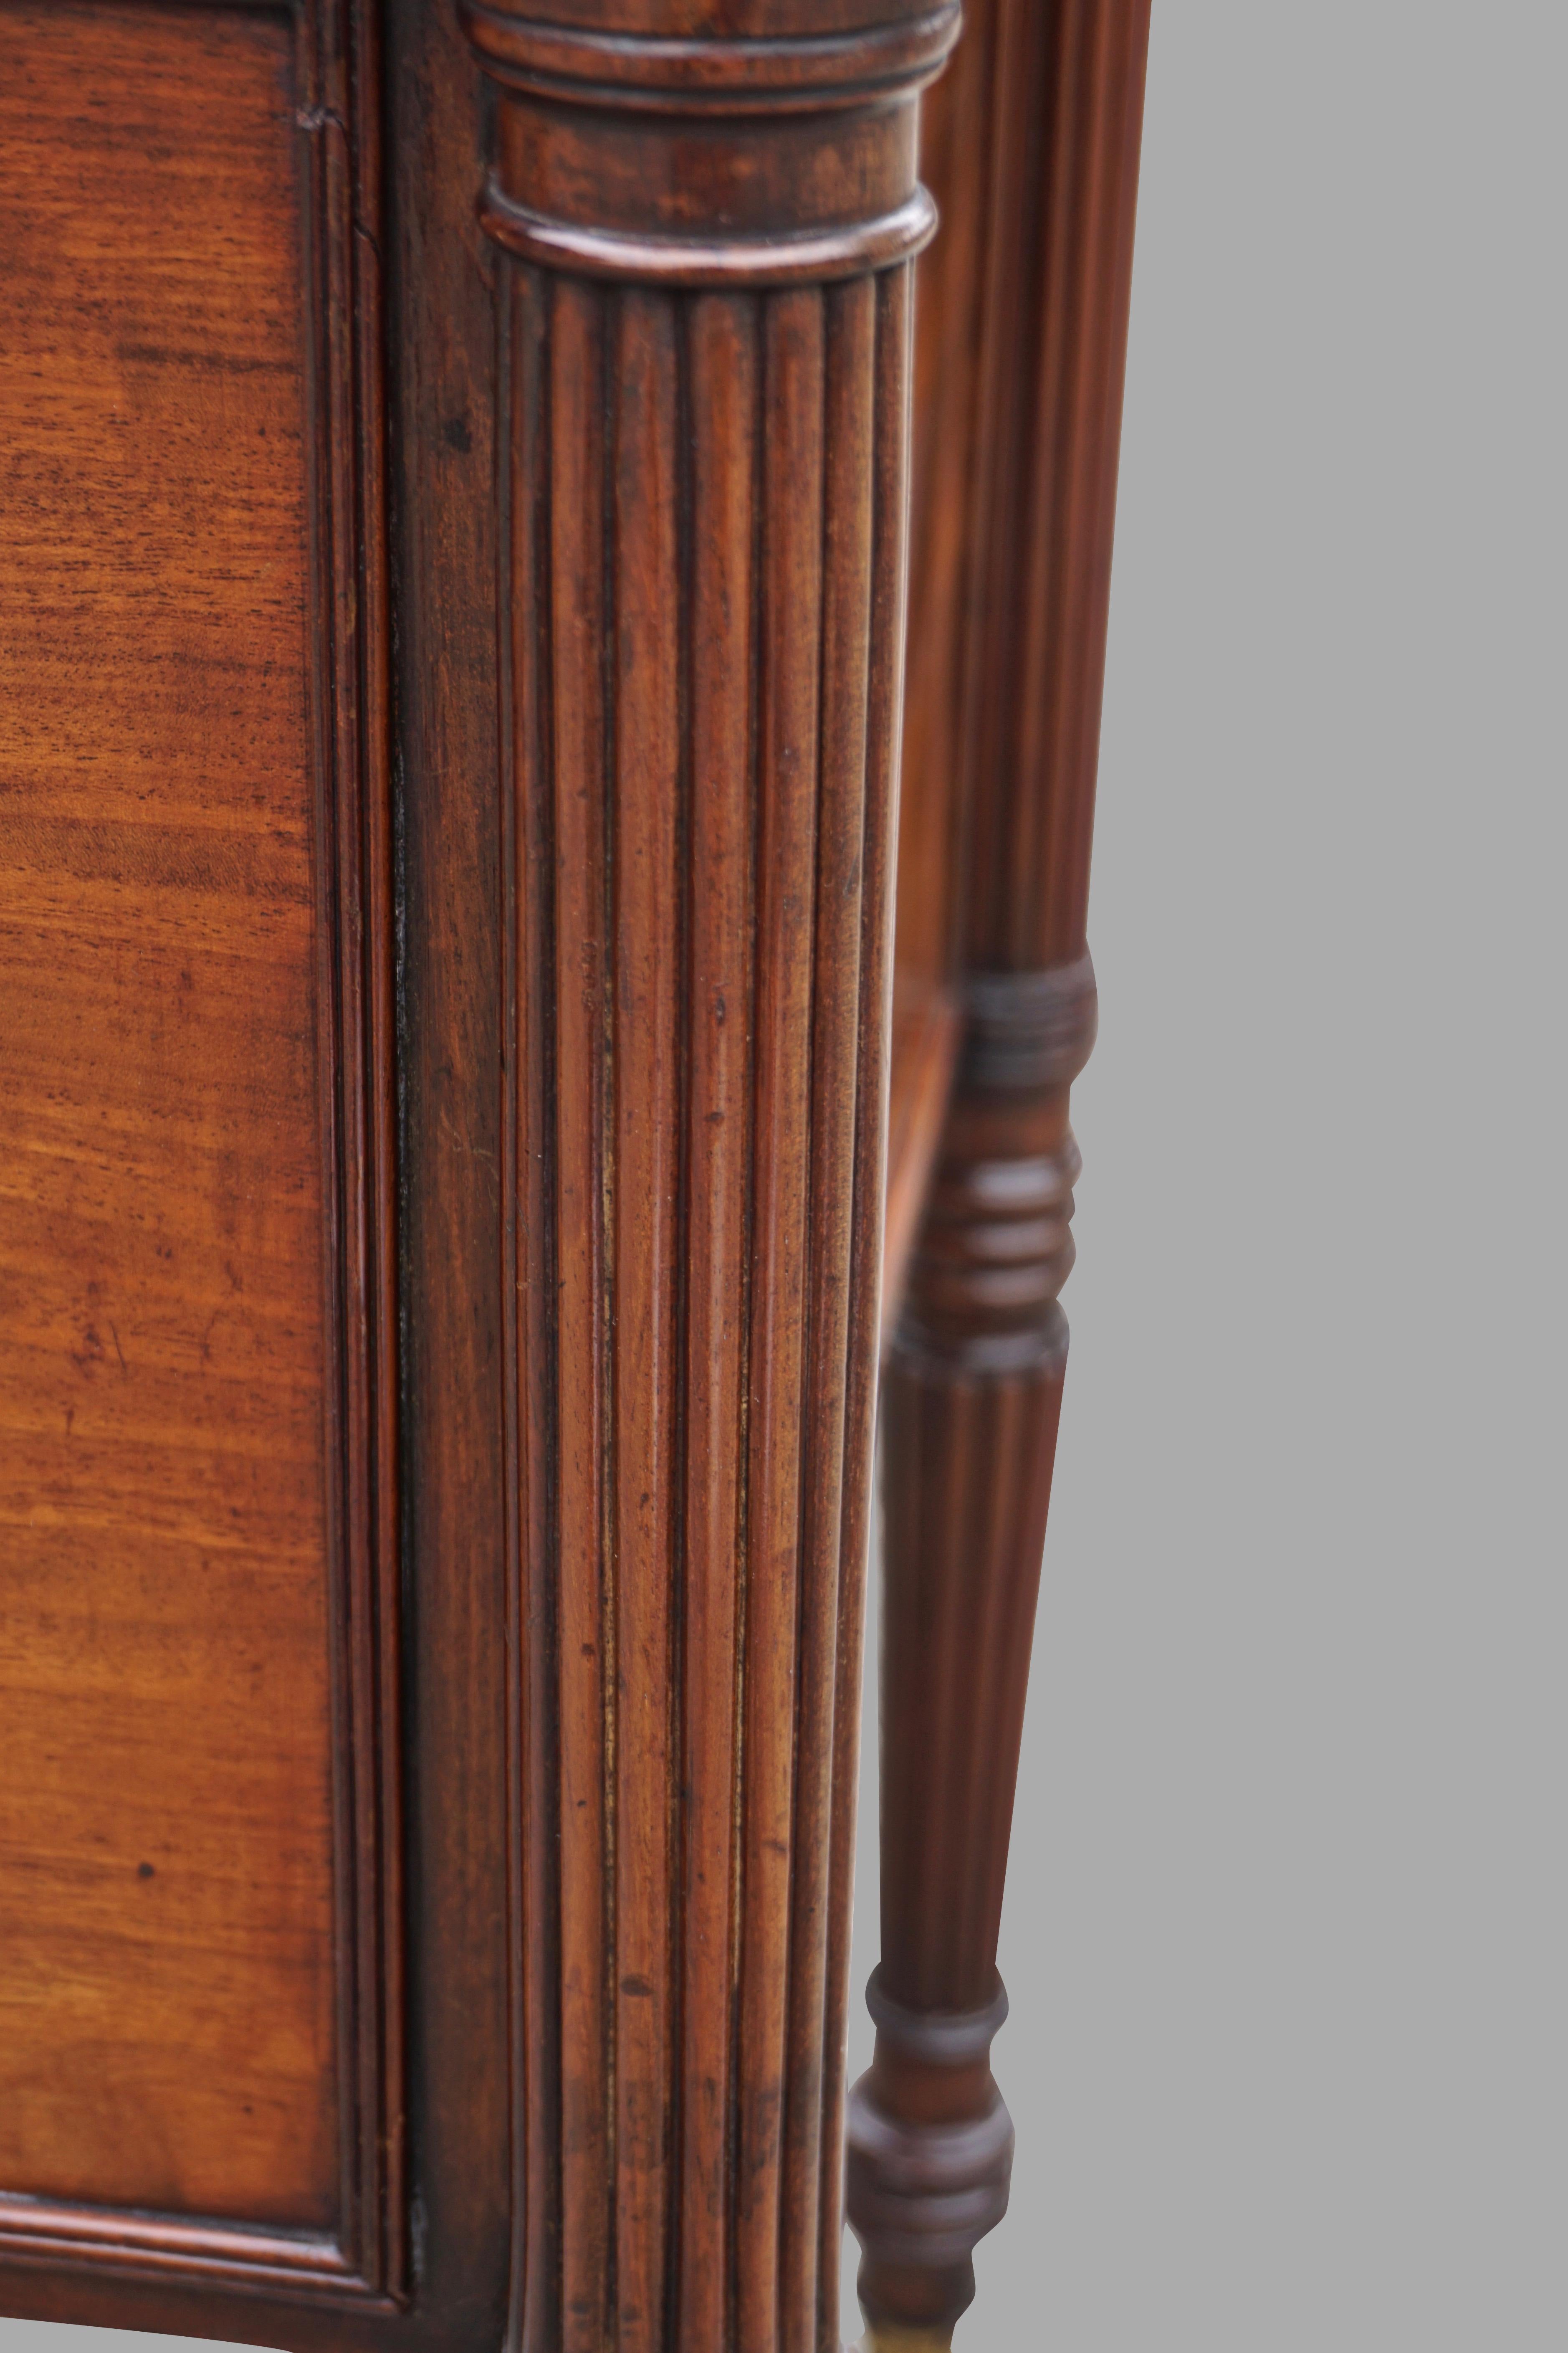 English Regency Period Mahogany Cellarette in the Manner of Gillows 1